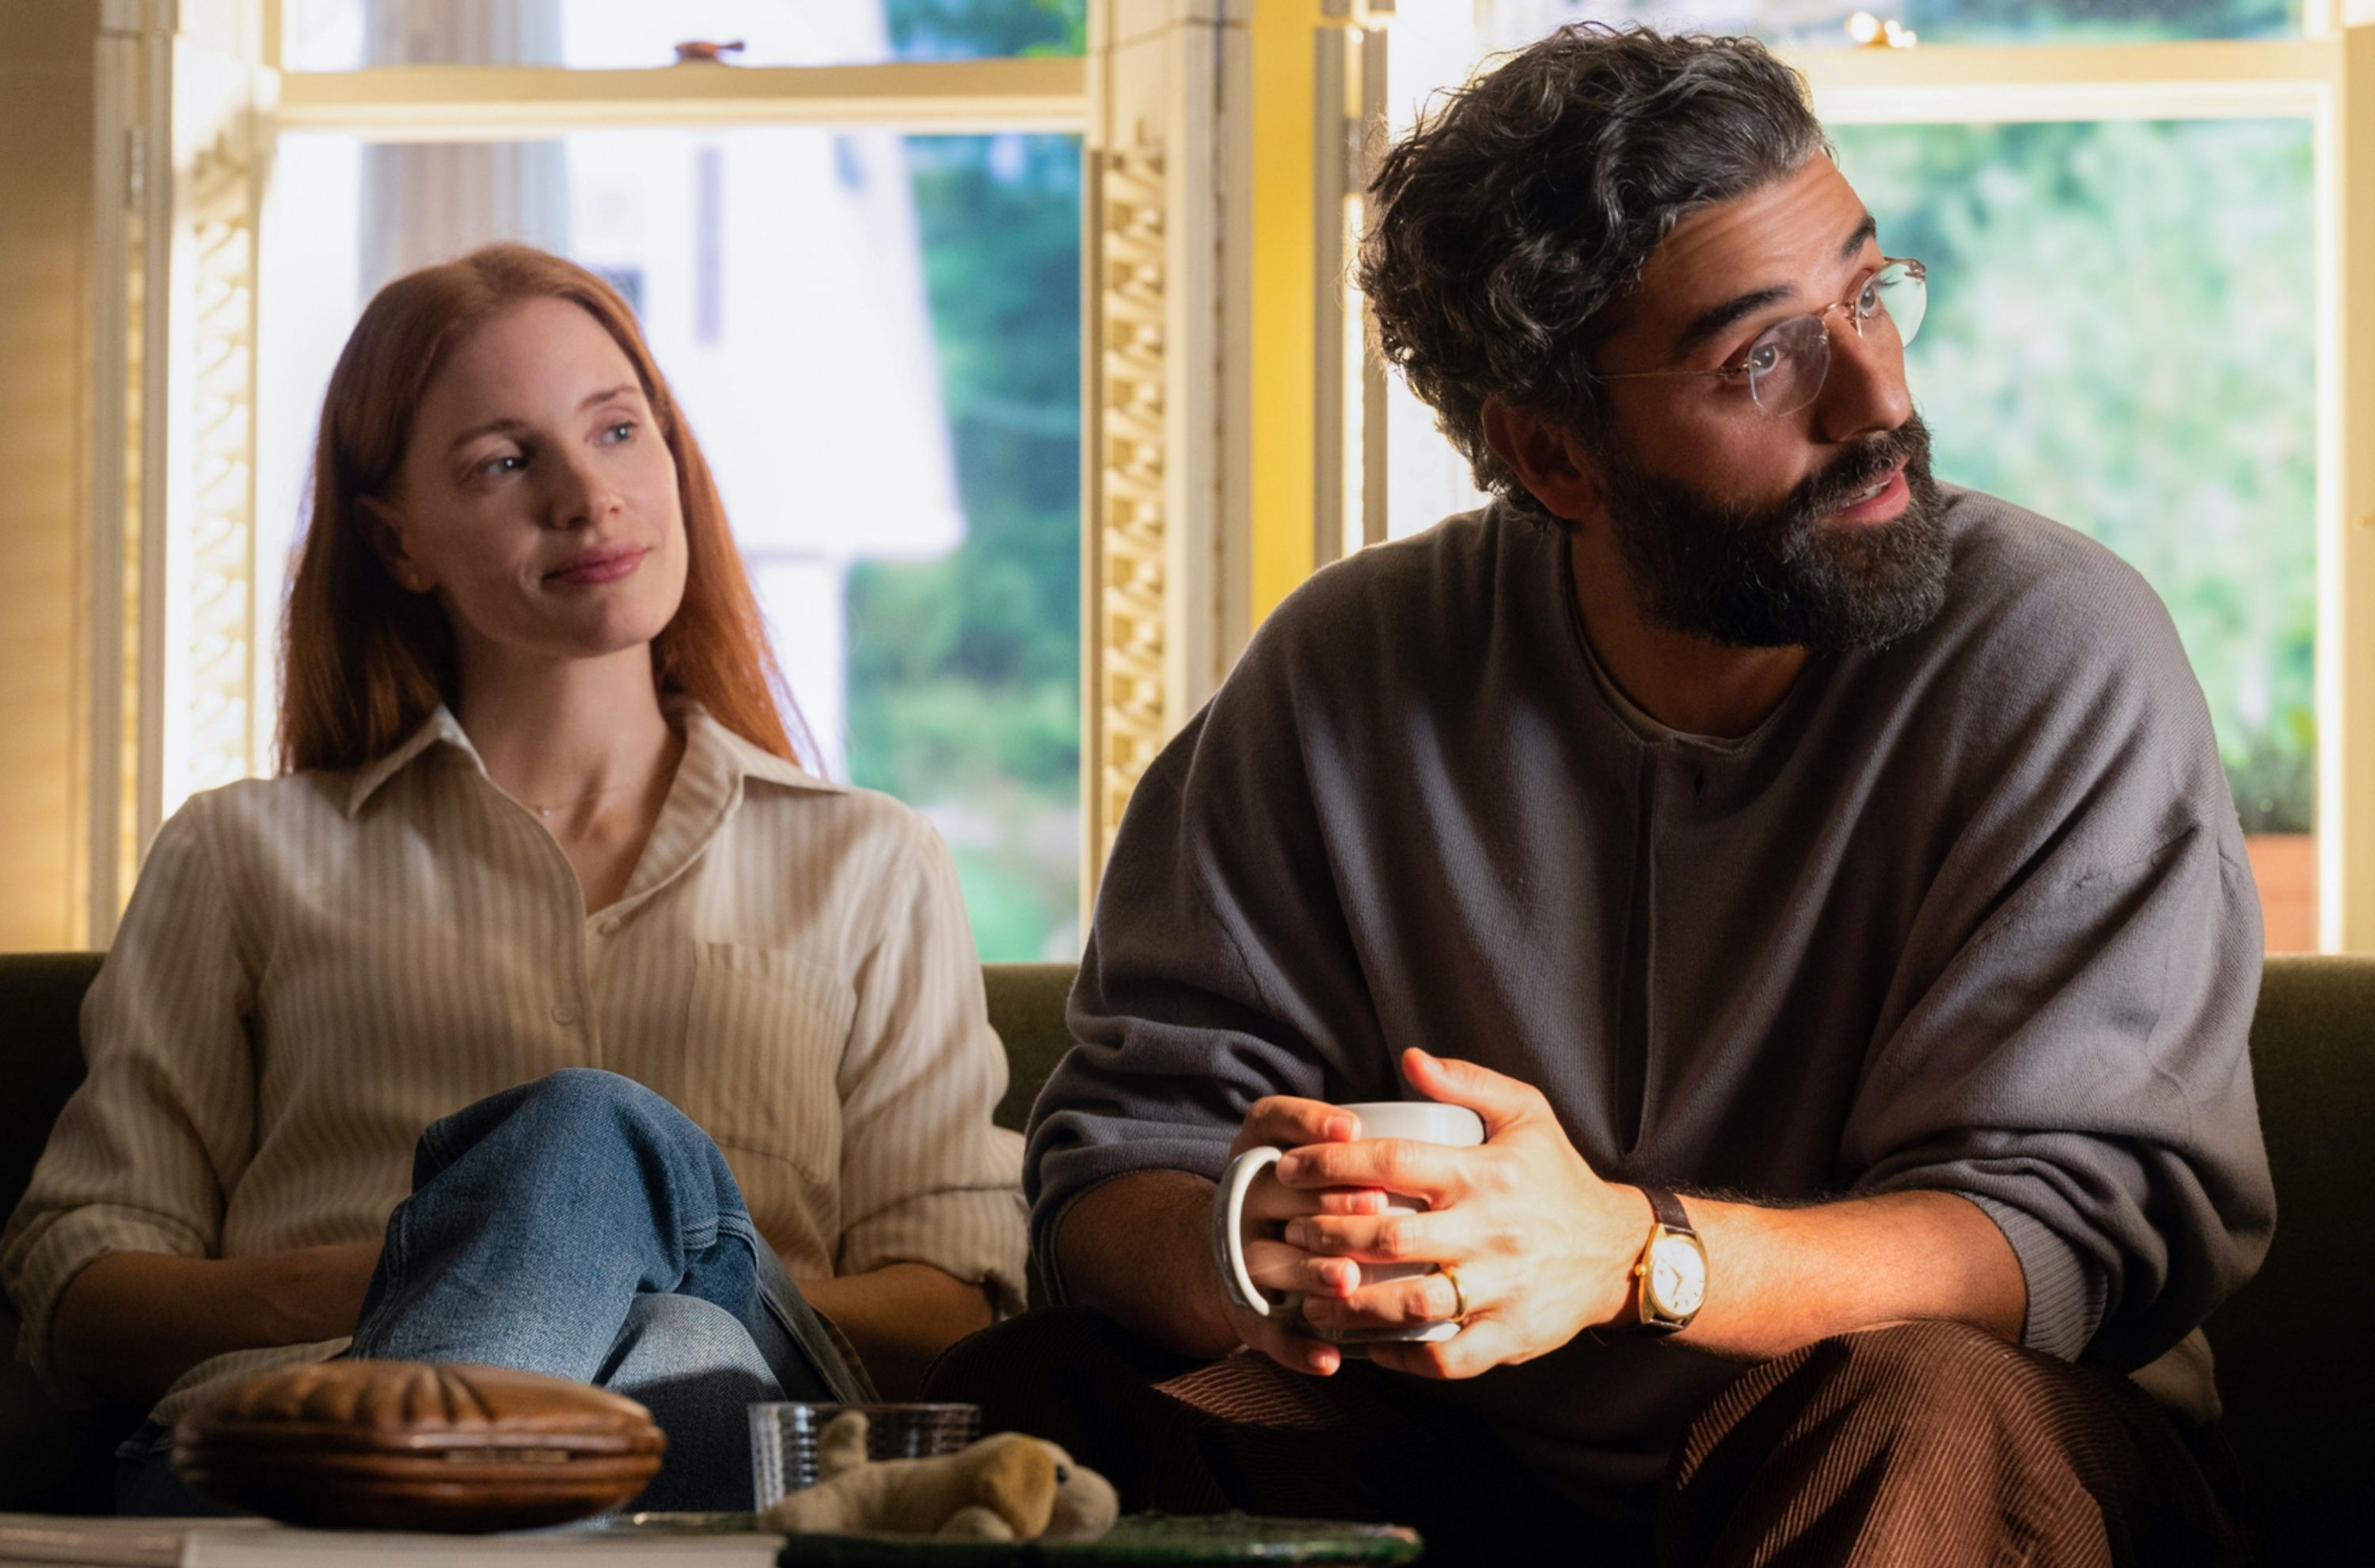 scenes-from-a-marriage-jessica-chastain-oscar-isaac-02